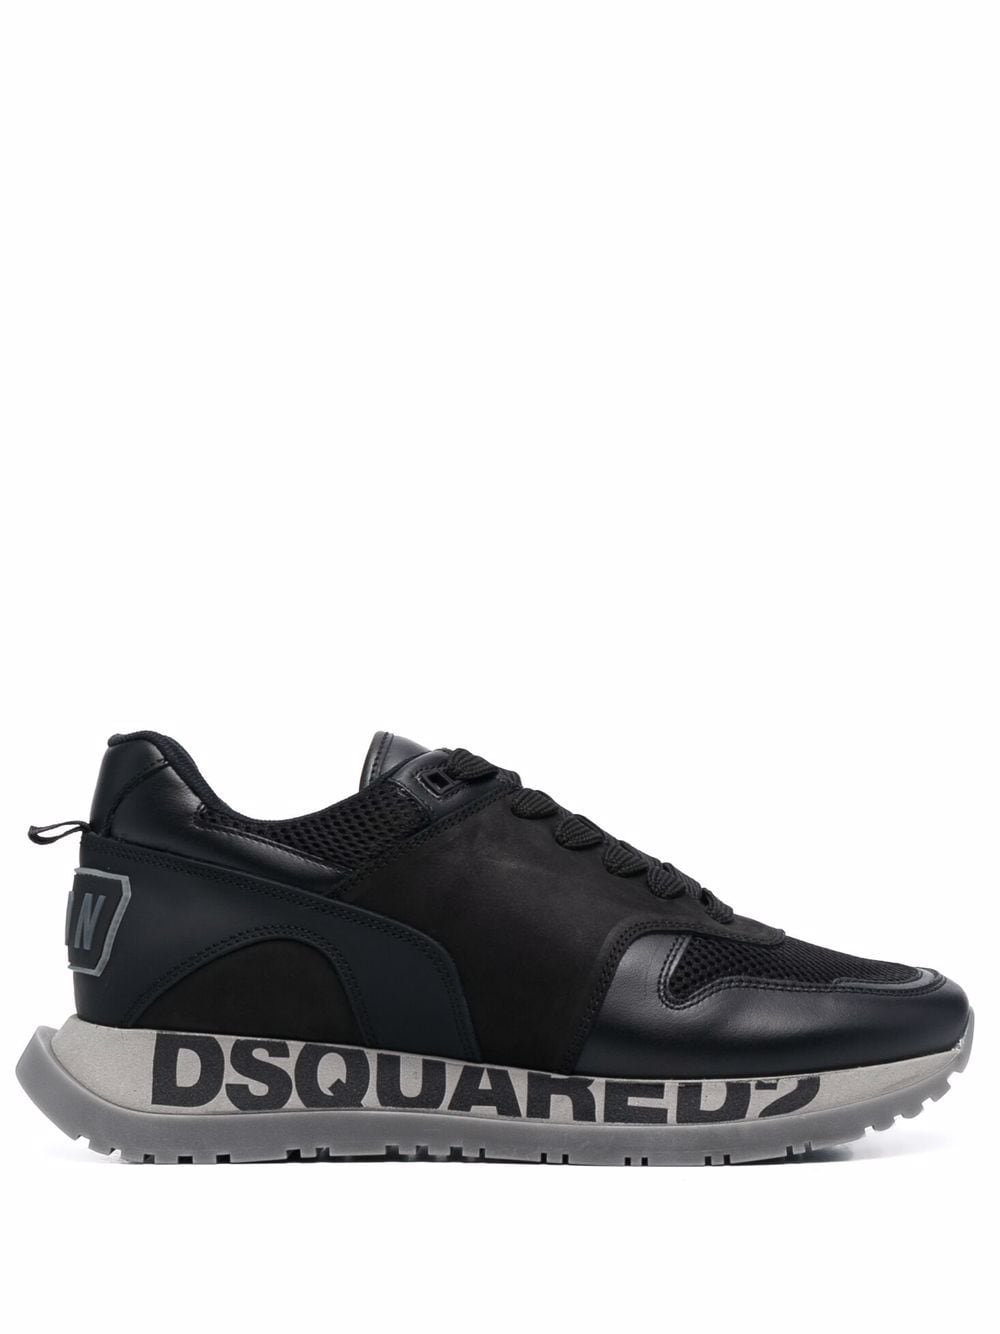 Stare Make dinner Climatic mountains Sneakers Dsquared2 | NoFakesAllowed